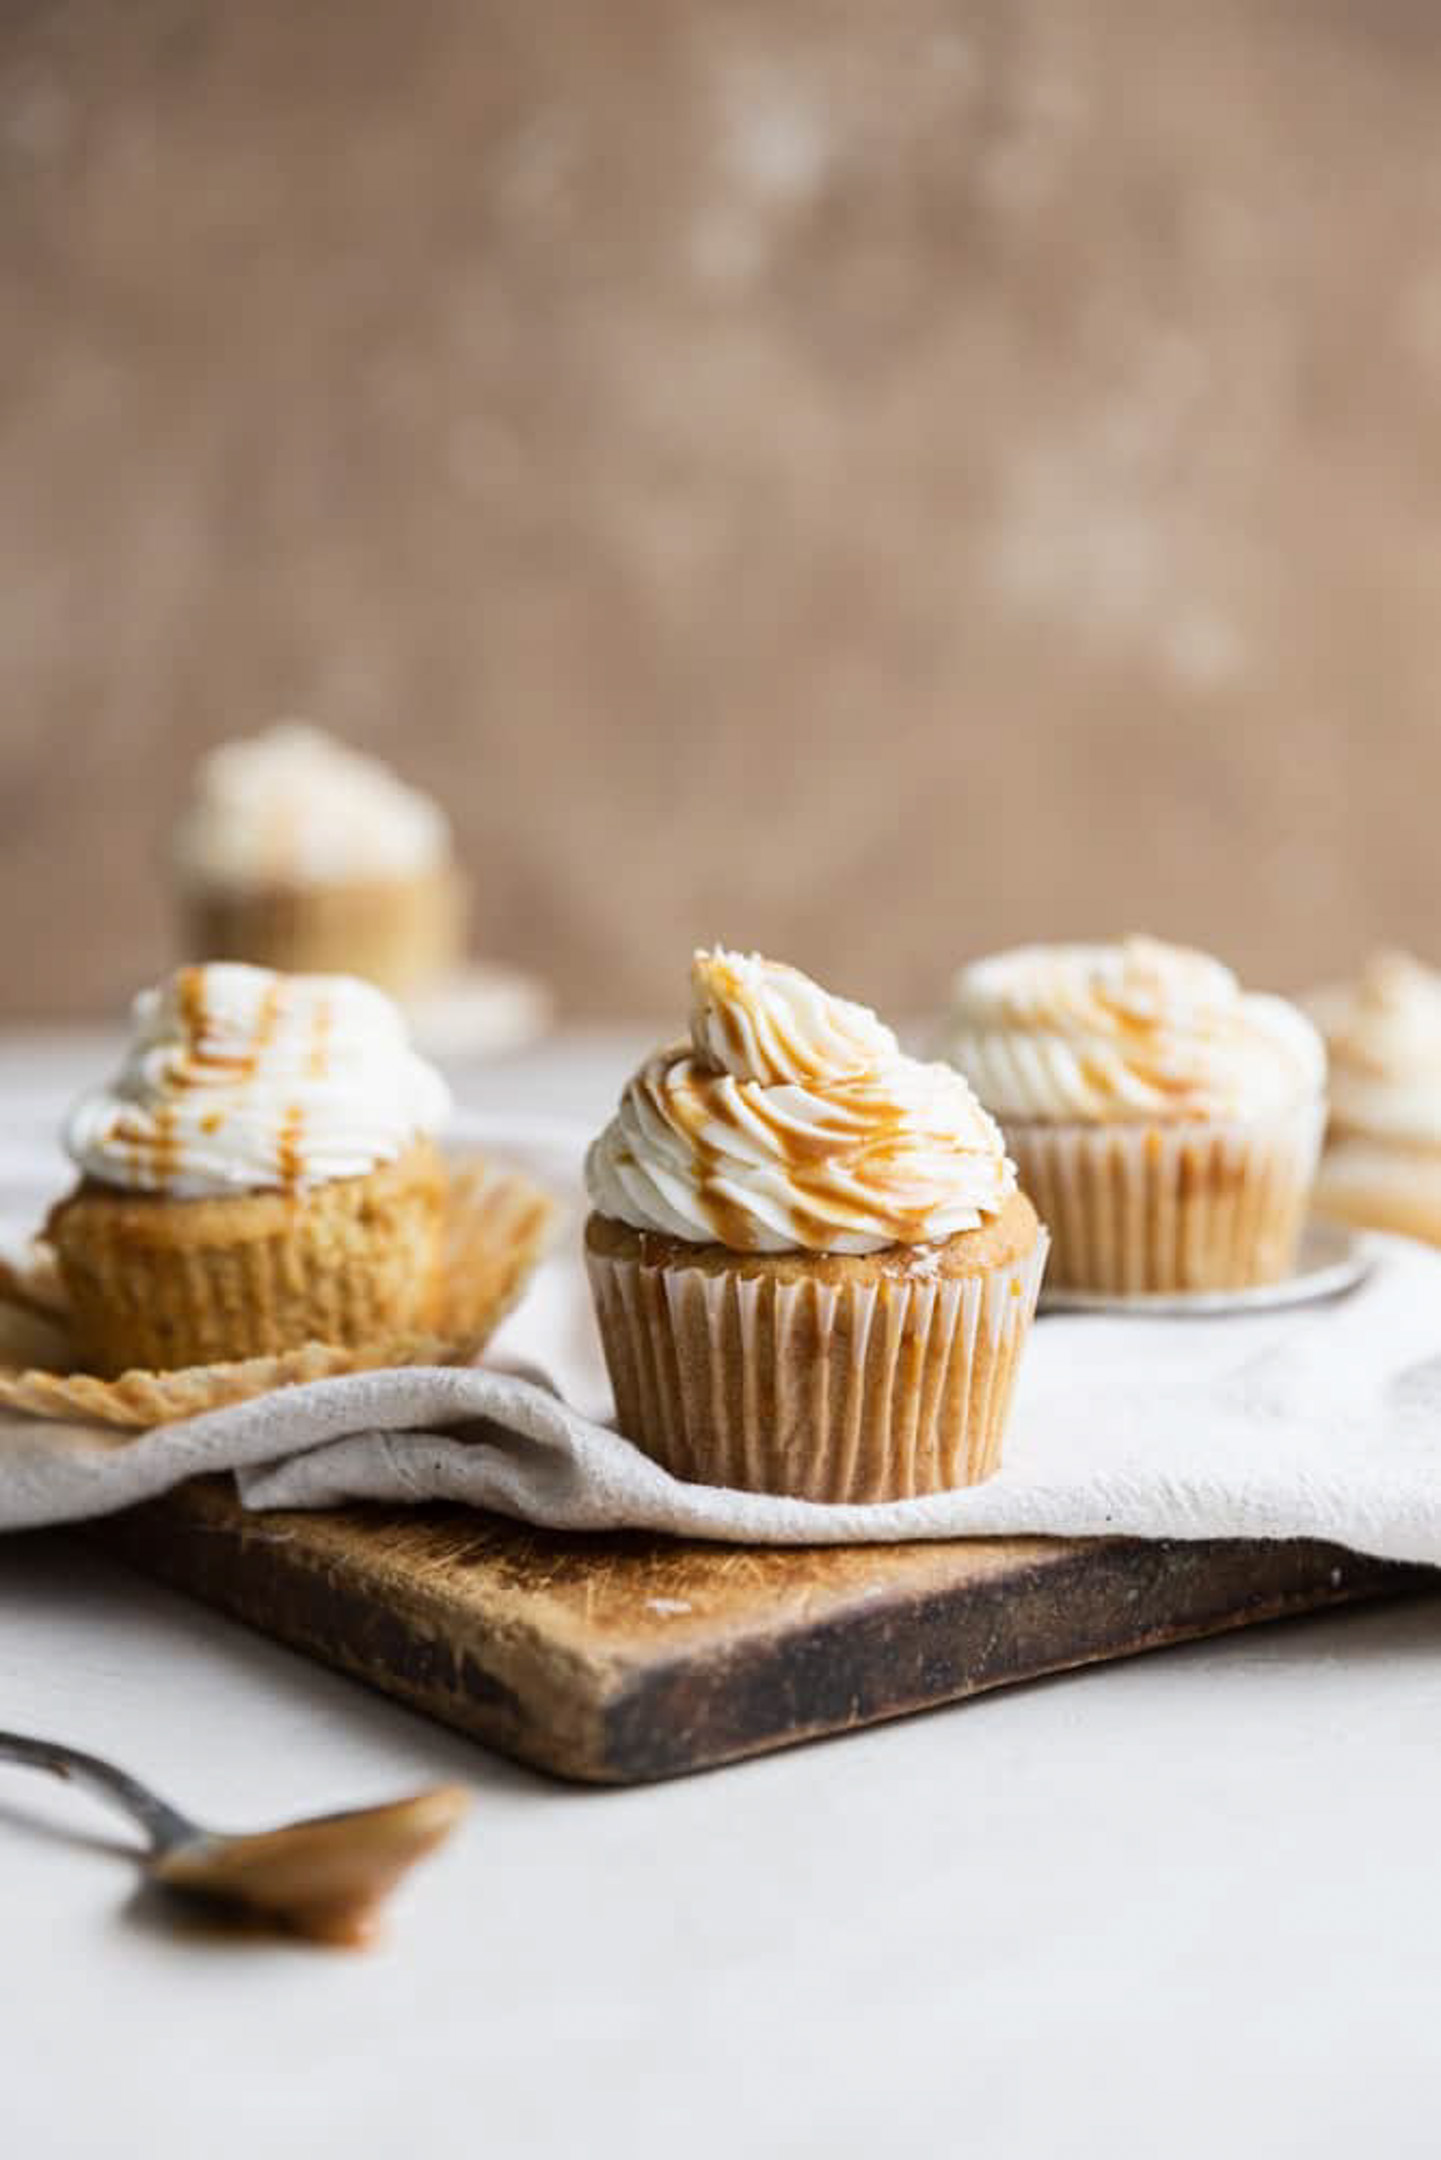 Caramel cupcakes topped with caramel frosting and glaze.